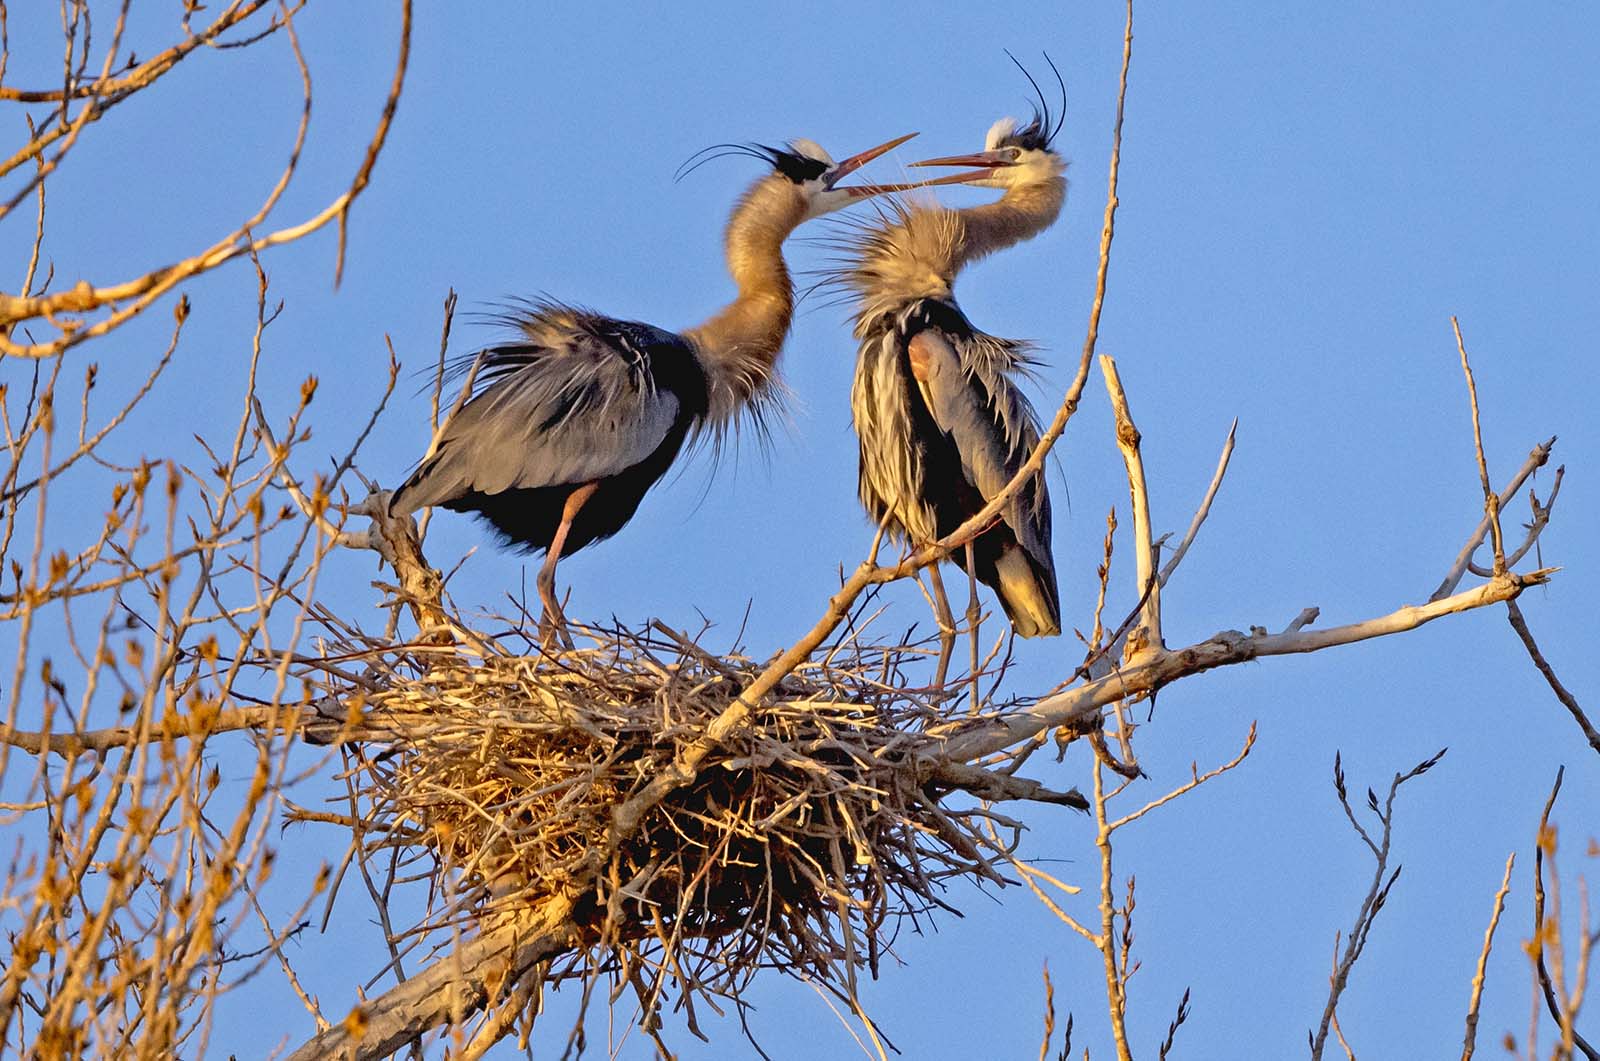 Two great blue herons show off their plumage at a nesting site. Photo by Rob Koelling.